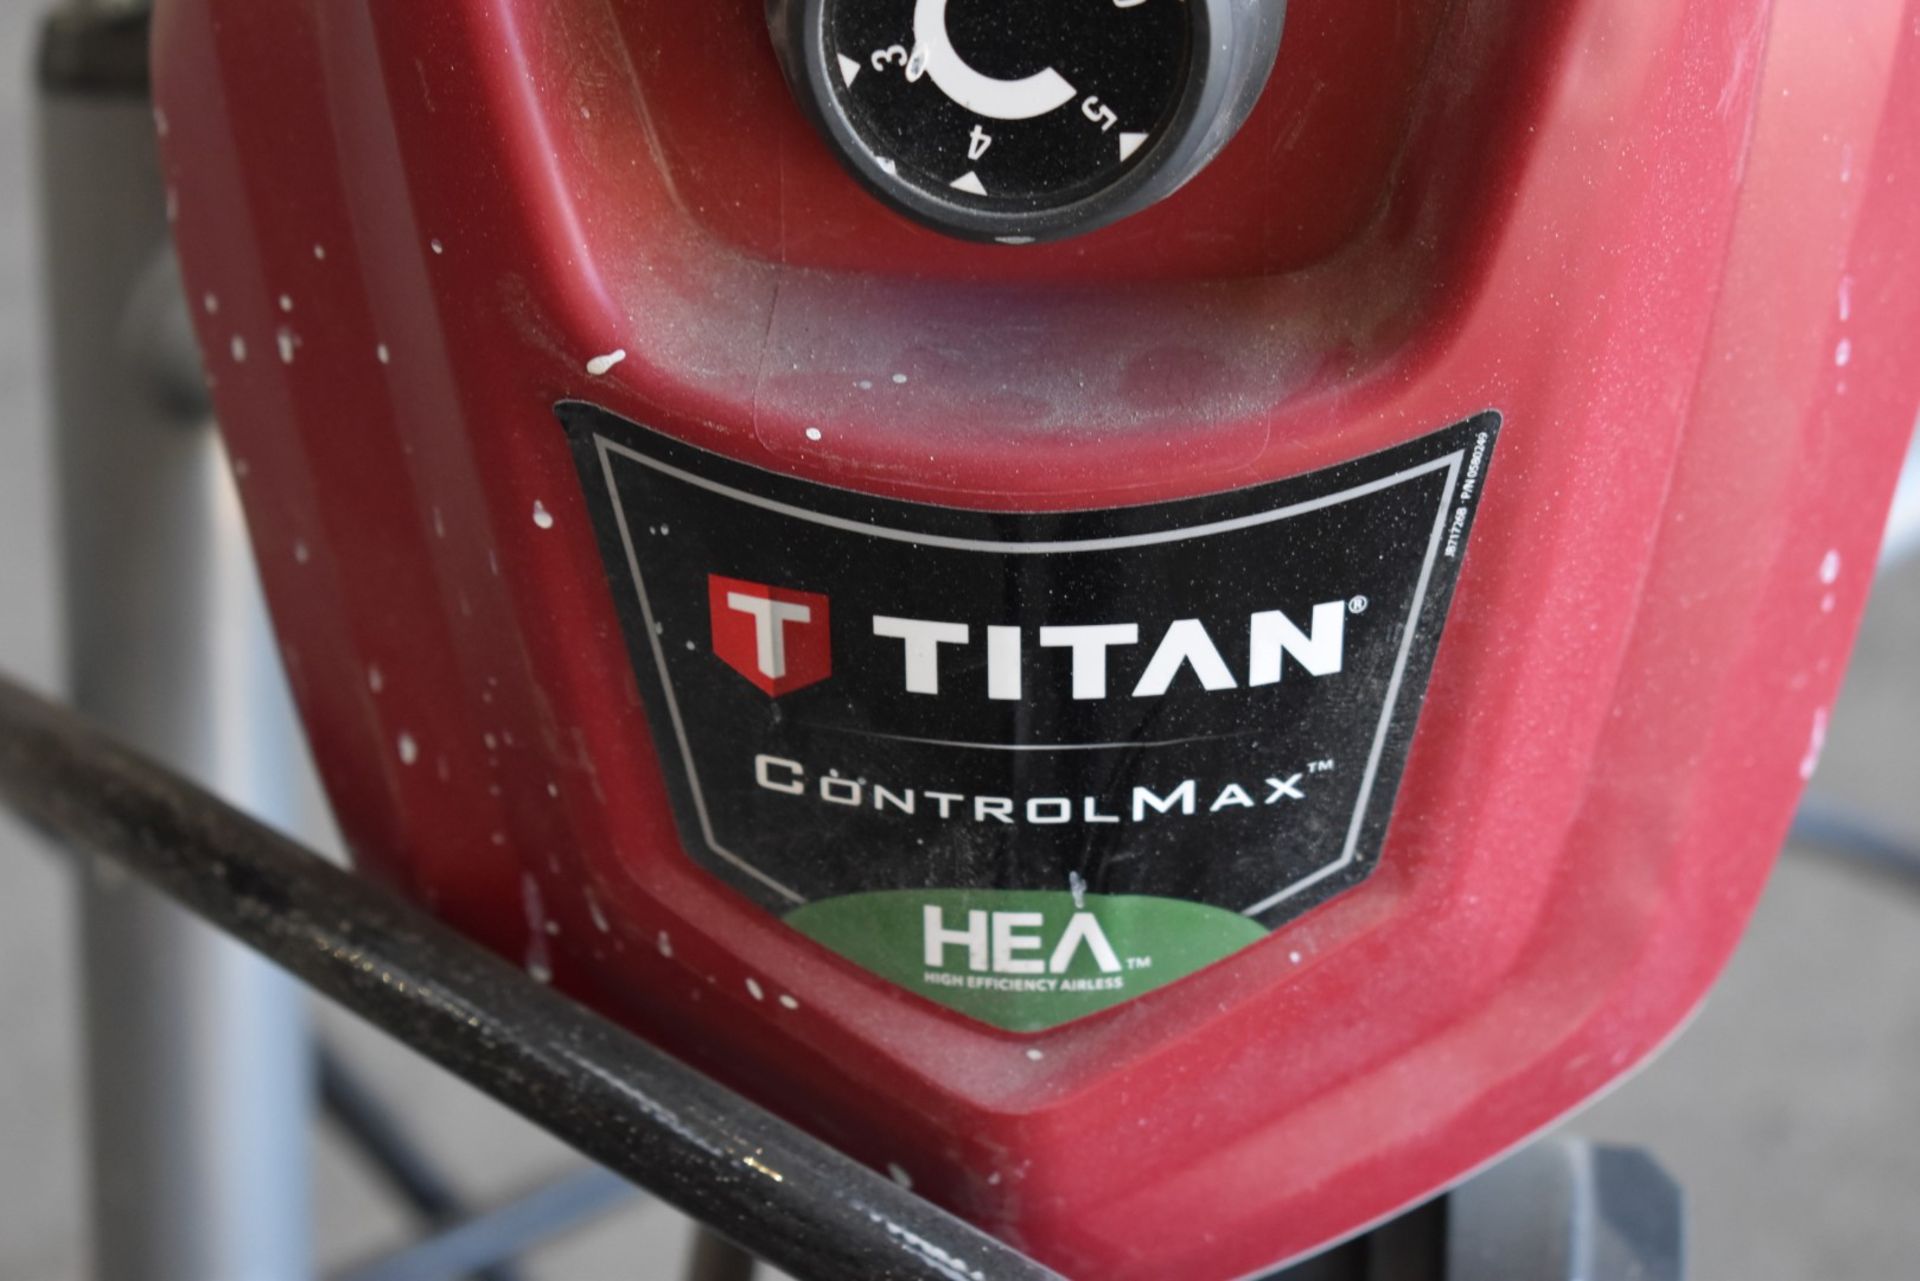 TITAN HEA CONTROLMAX 1700PRO HIGH EFFICIENCY AIRLESS PAINT SPRAYER WITH HOSE AND GUN, S/N: N/A - Image 2 of 4